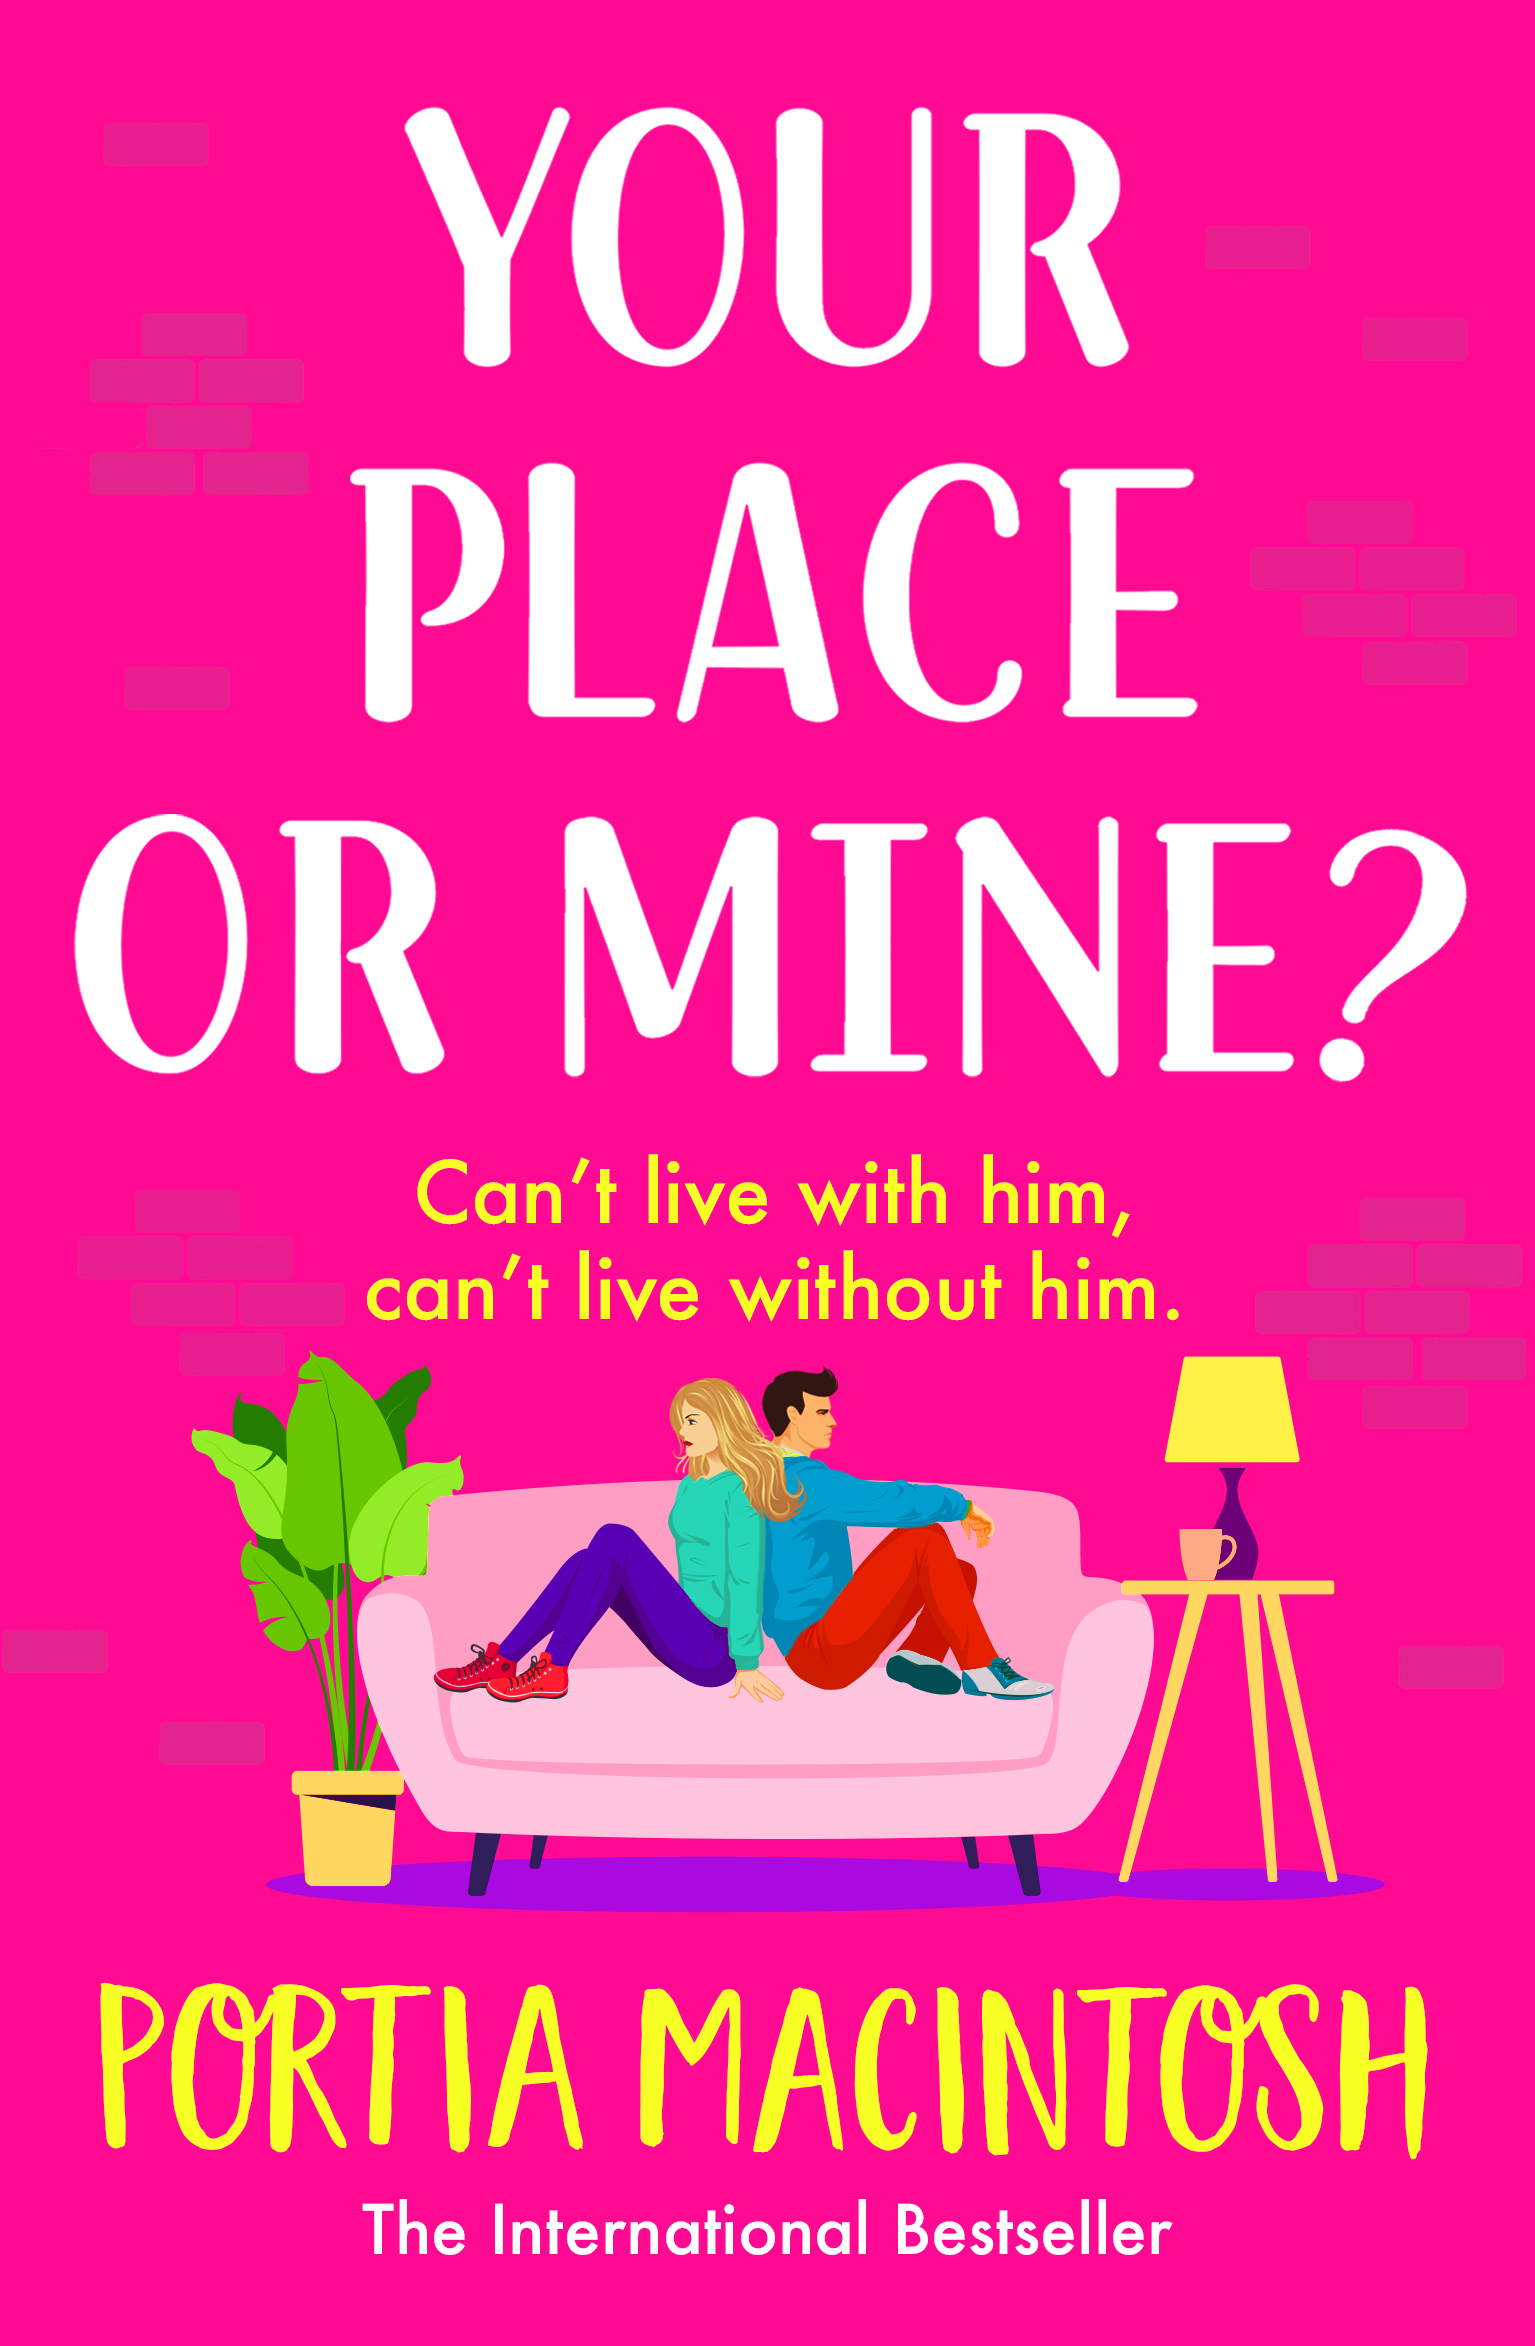 Post: Your Place or Mine? By Portia MacIntoshReview